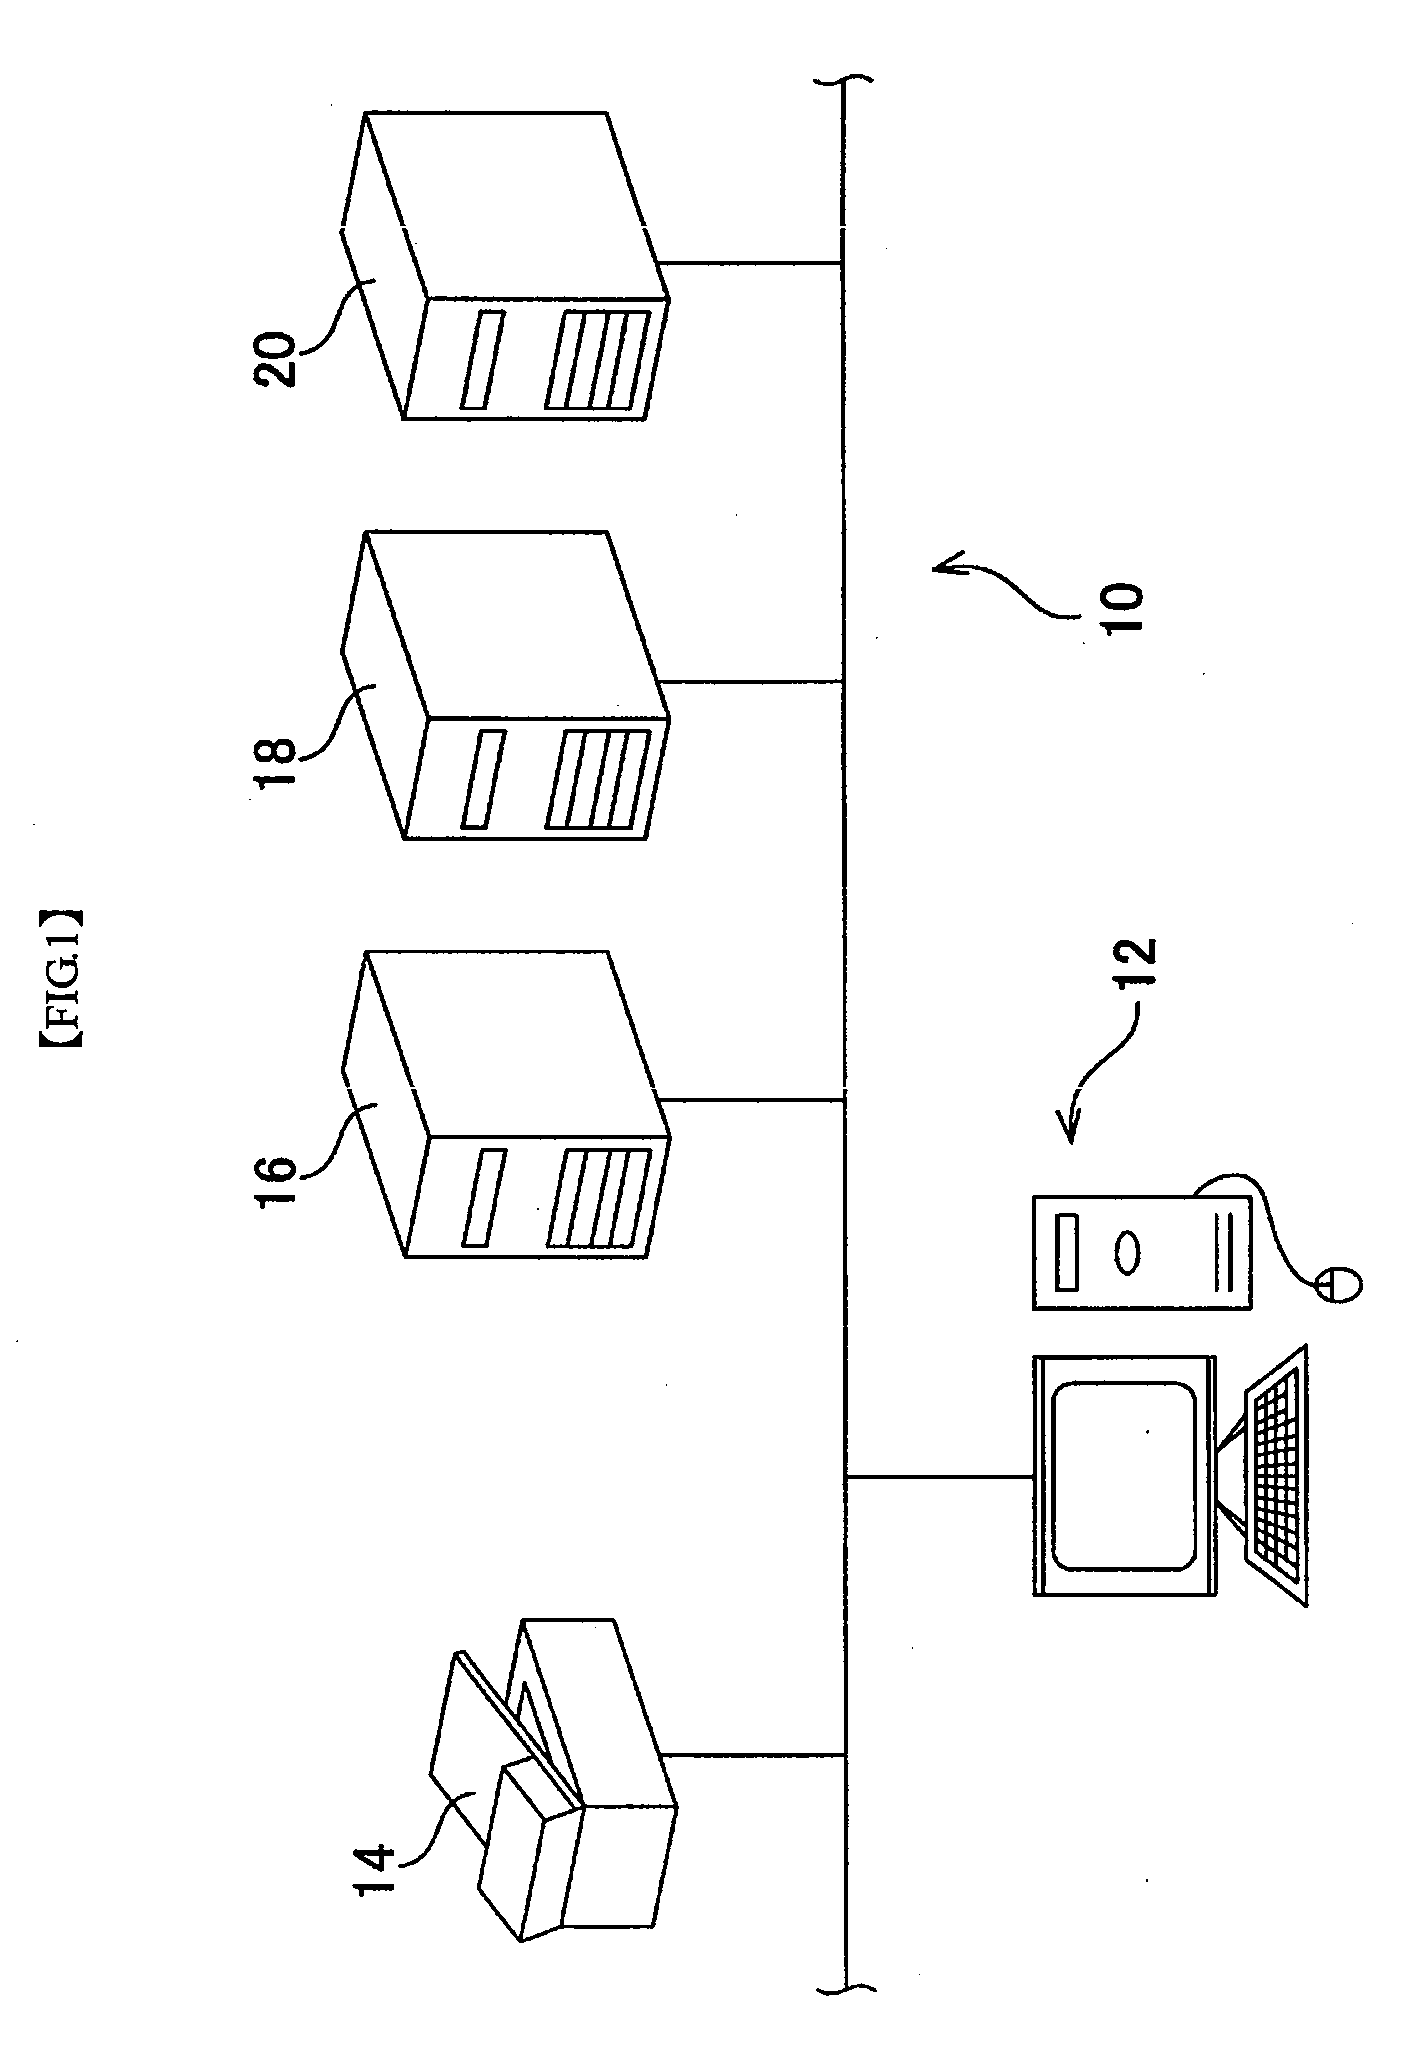 Network file processing system and scanner device